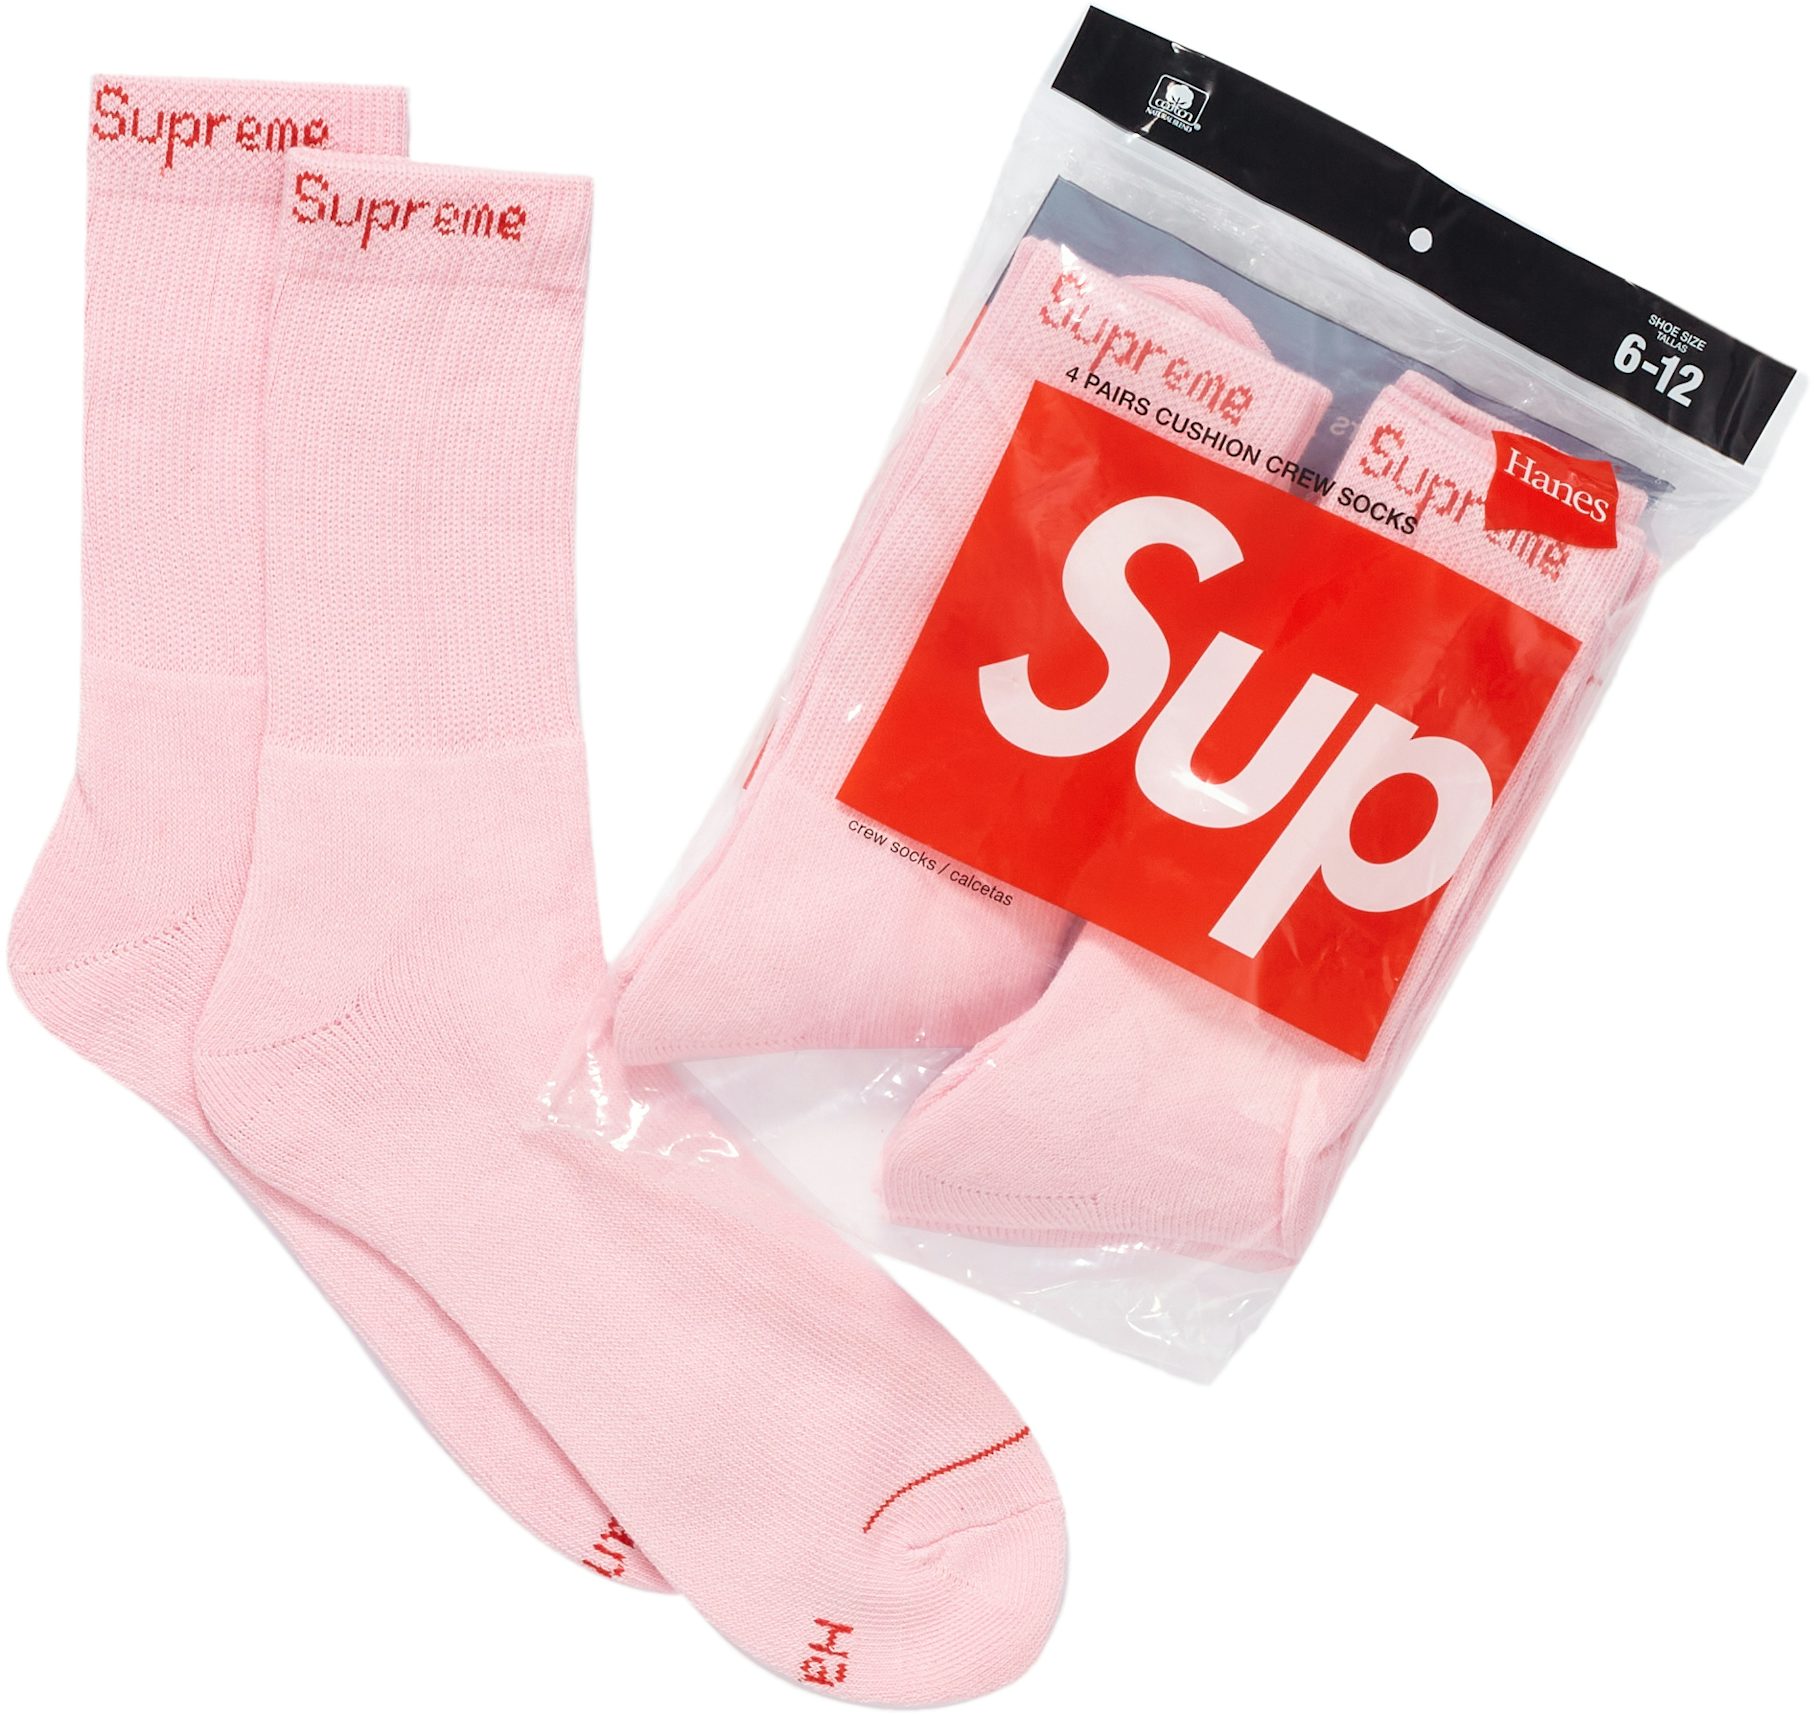 SUPREME X HANES PINK Tagless T-shirt Tee (Pack of 2) Size Small NEW FW21